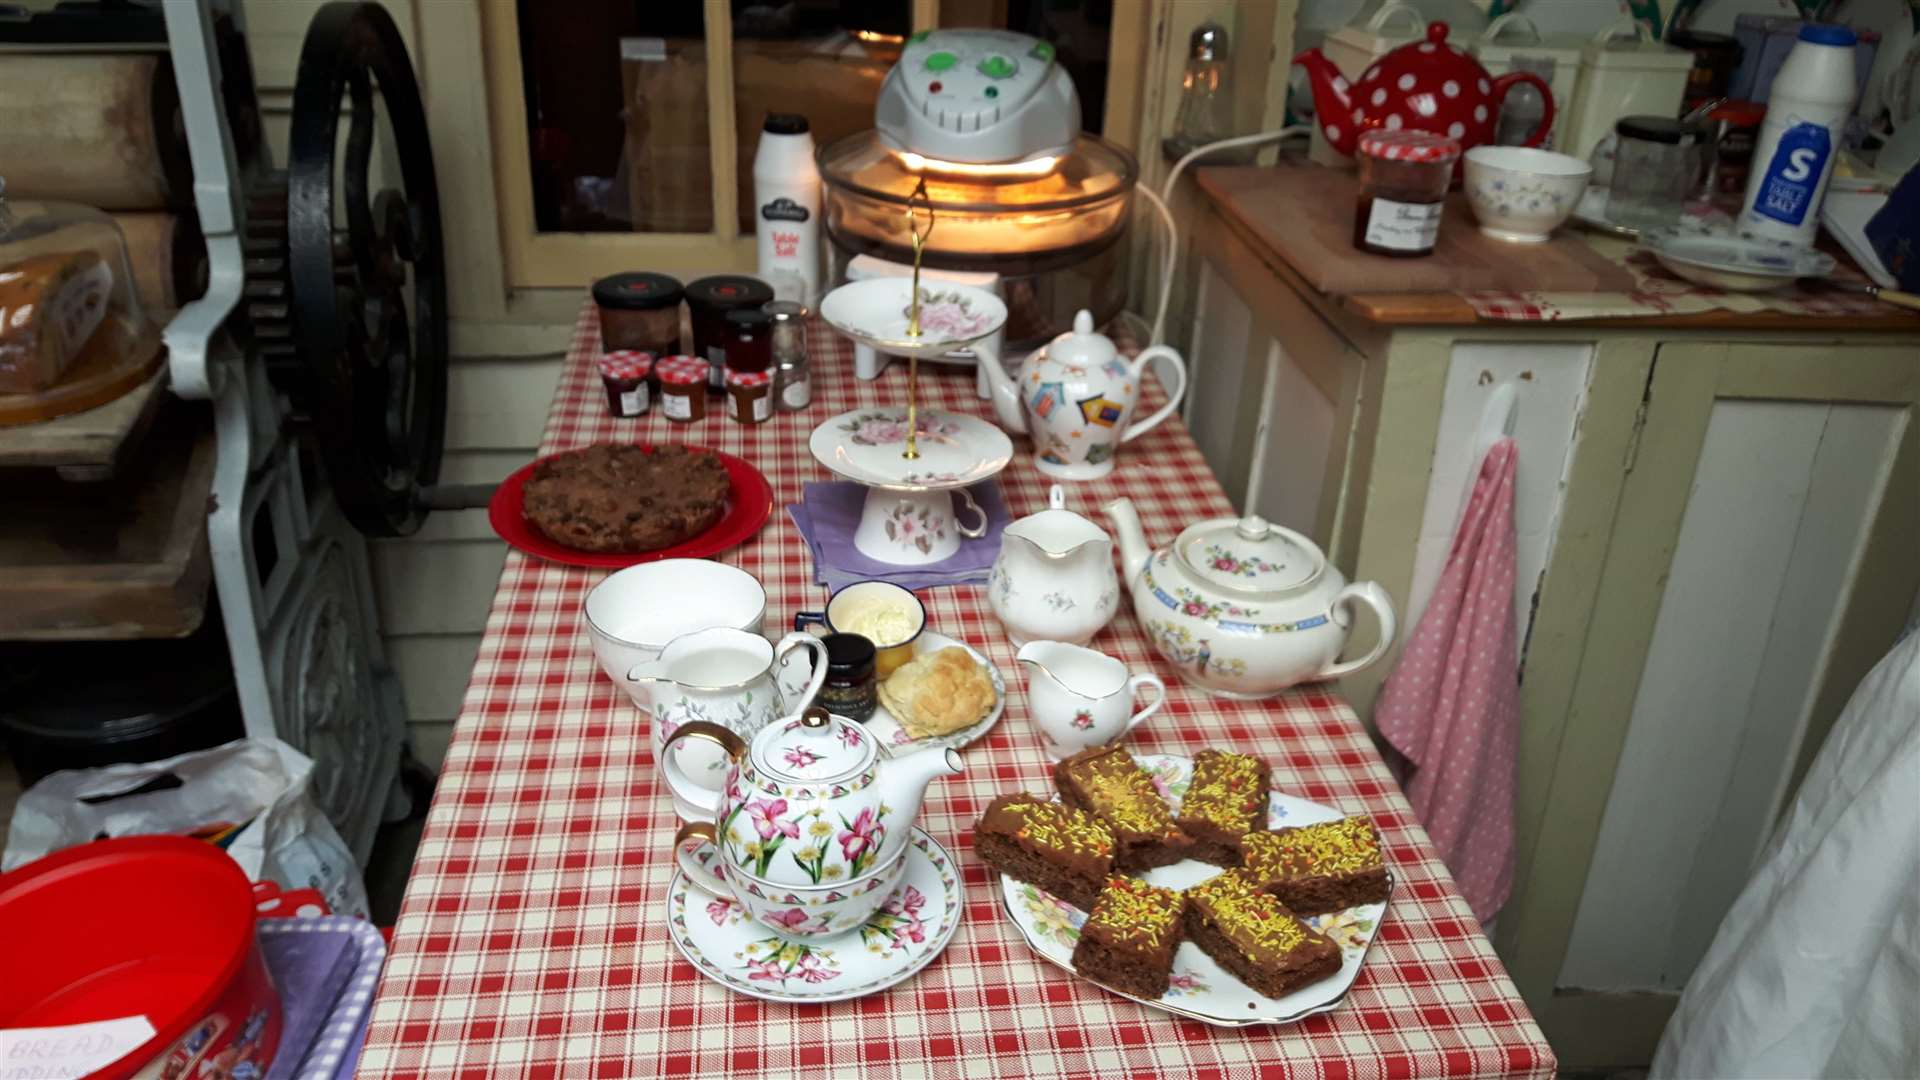 The kitchen table laid for cream teas at the Cottage of Curiosities in Rose Street, Sheerness